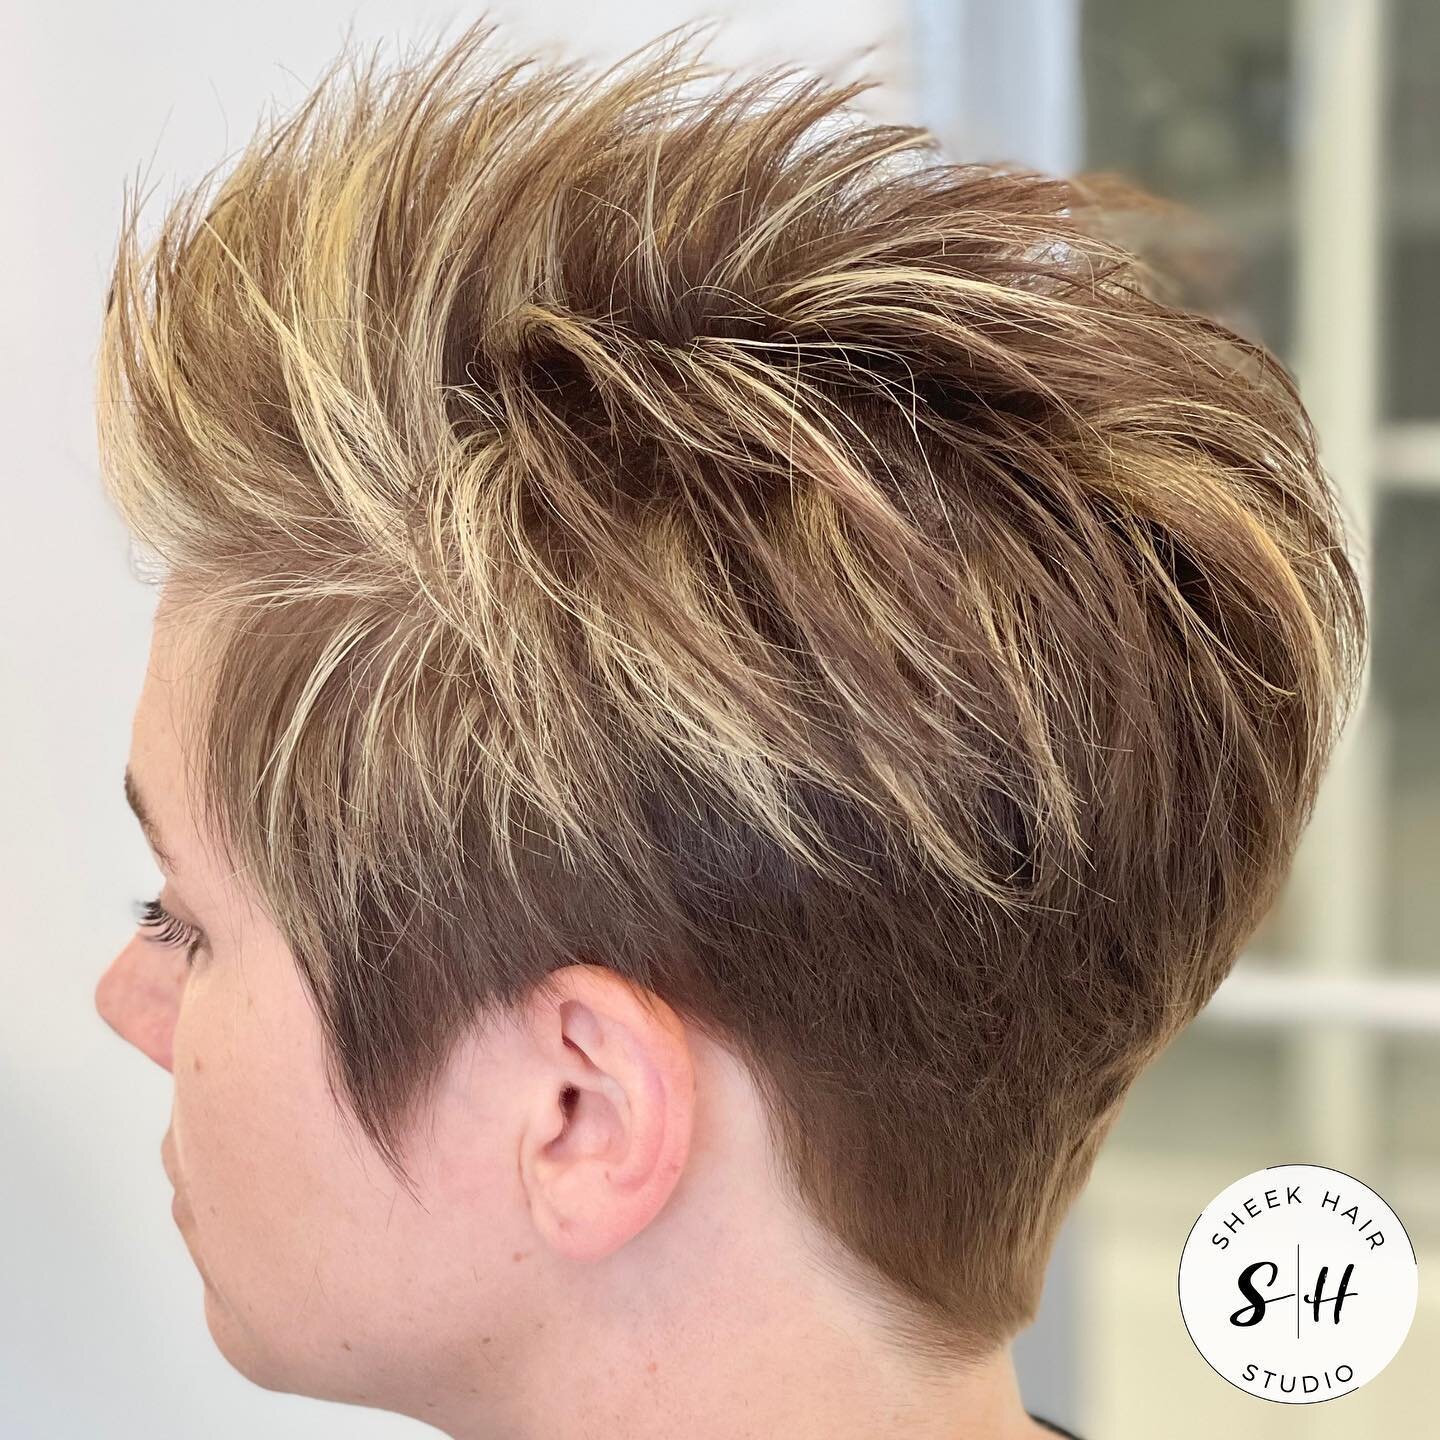 A trim ✂️and highlights ✨ make a world of the difference in how vibrant and healthy your hair can look. ⠀
⠀
Book an appointment with our Owner &amp; Hairstylist @a.roya today by calling/texting 469-655-0770 or by clicking the &ldquo;Book Now&rdquo; b